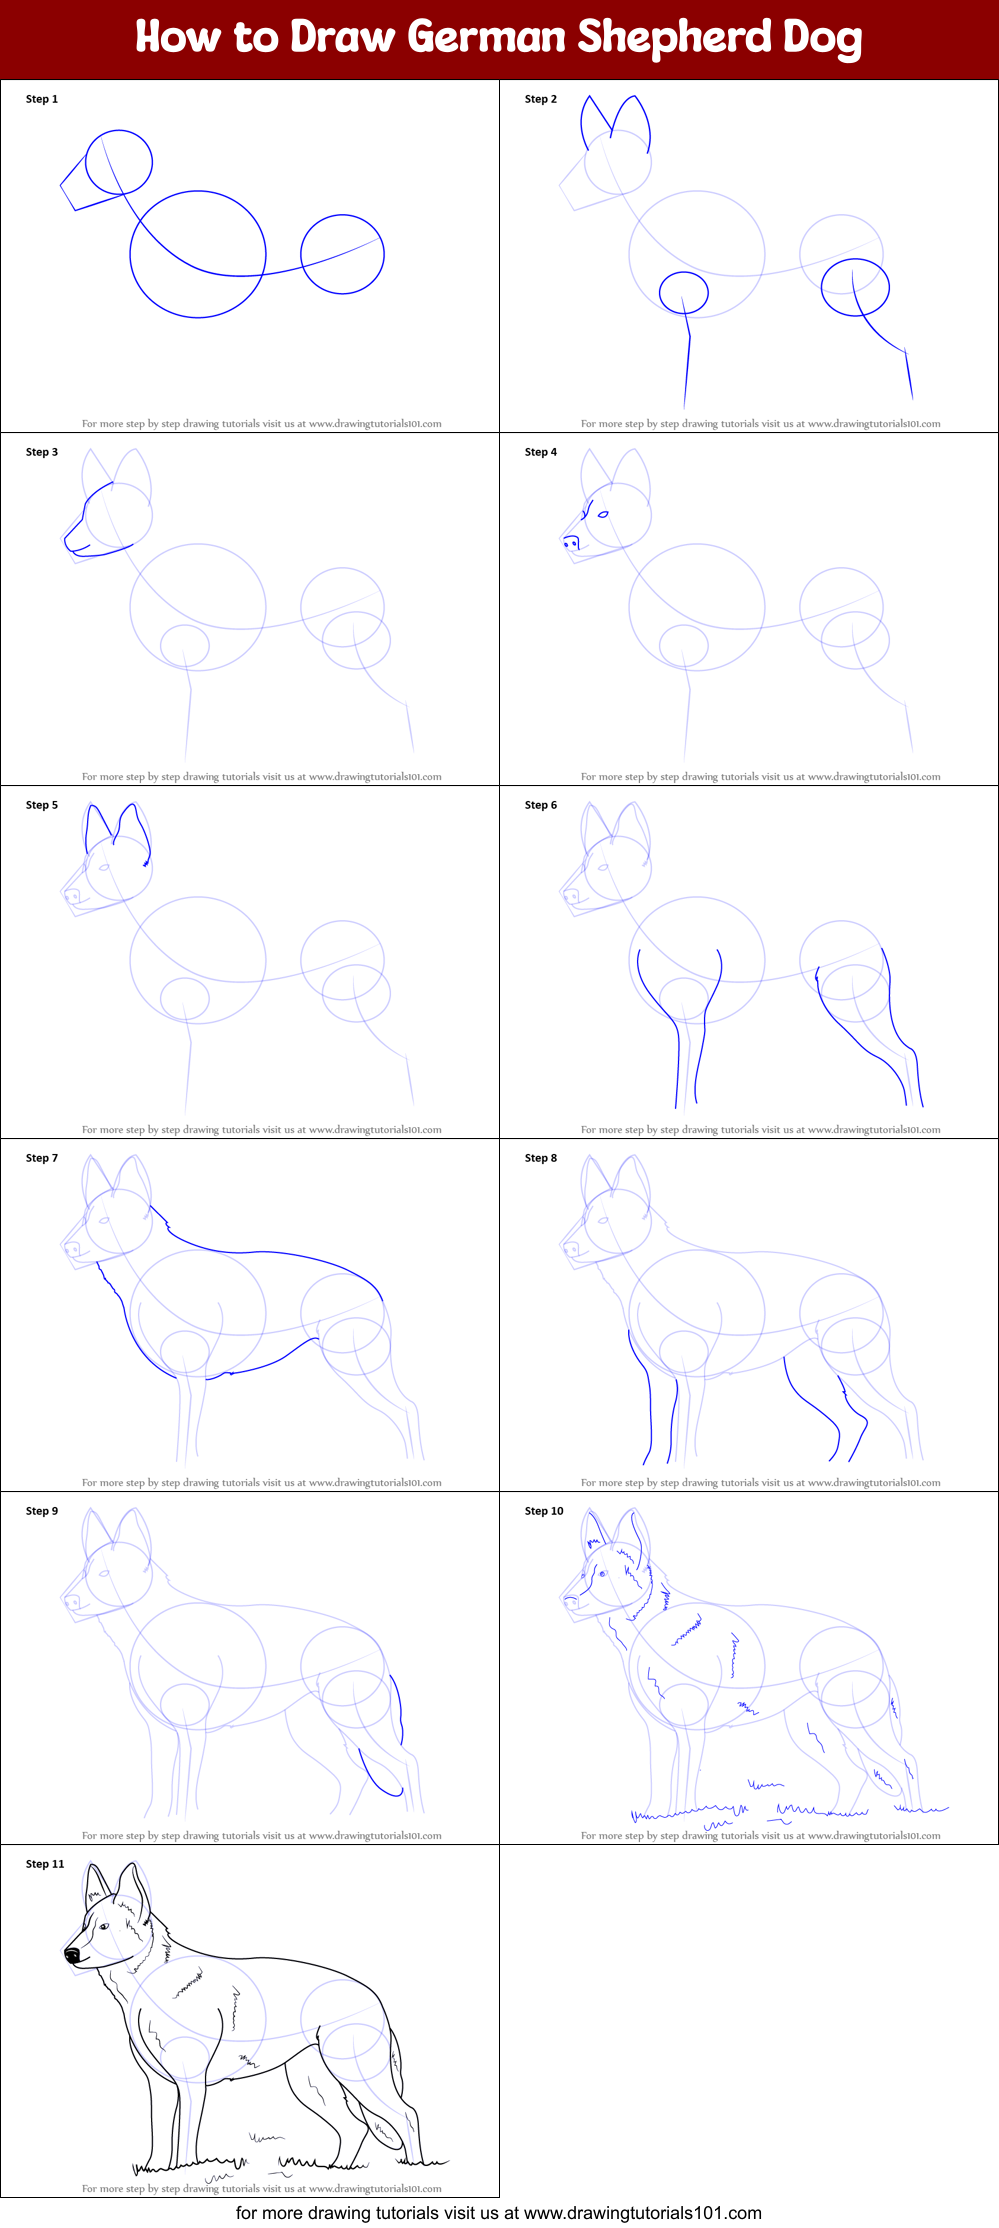 How to Draw German Shepherd Dog printable step by step drawing sheet